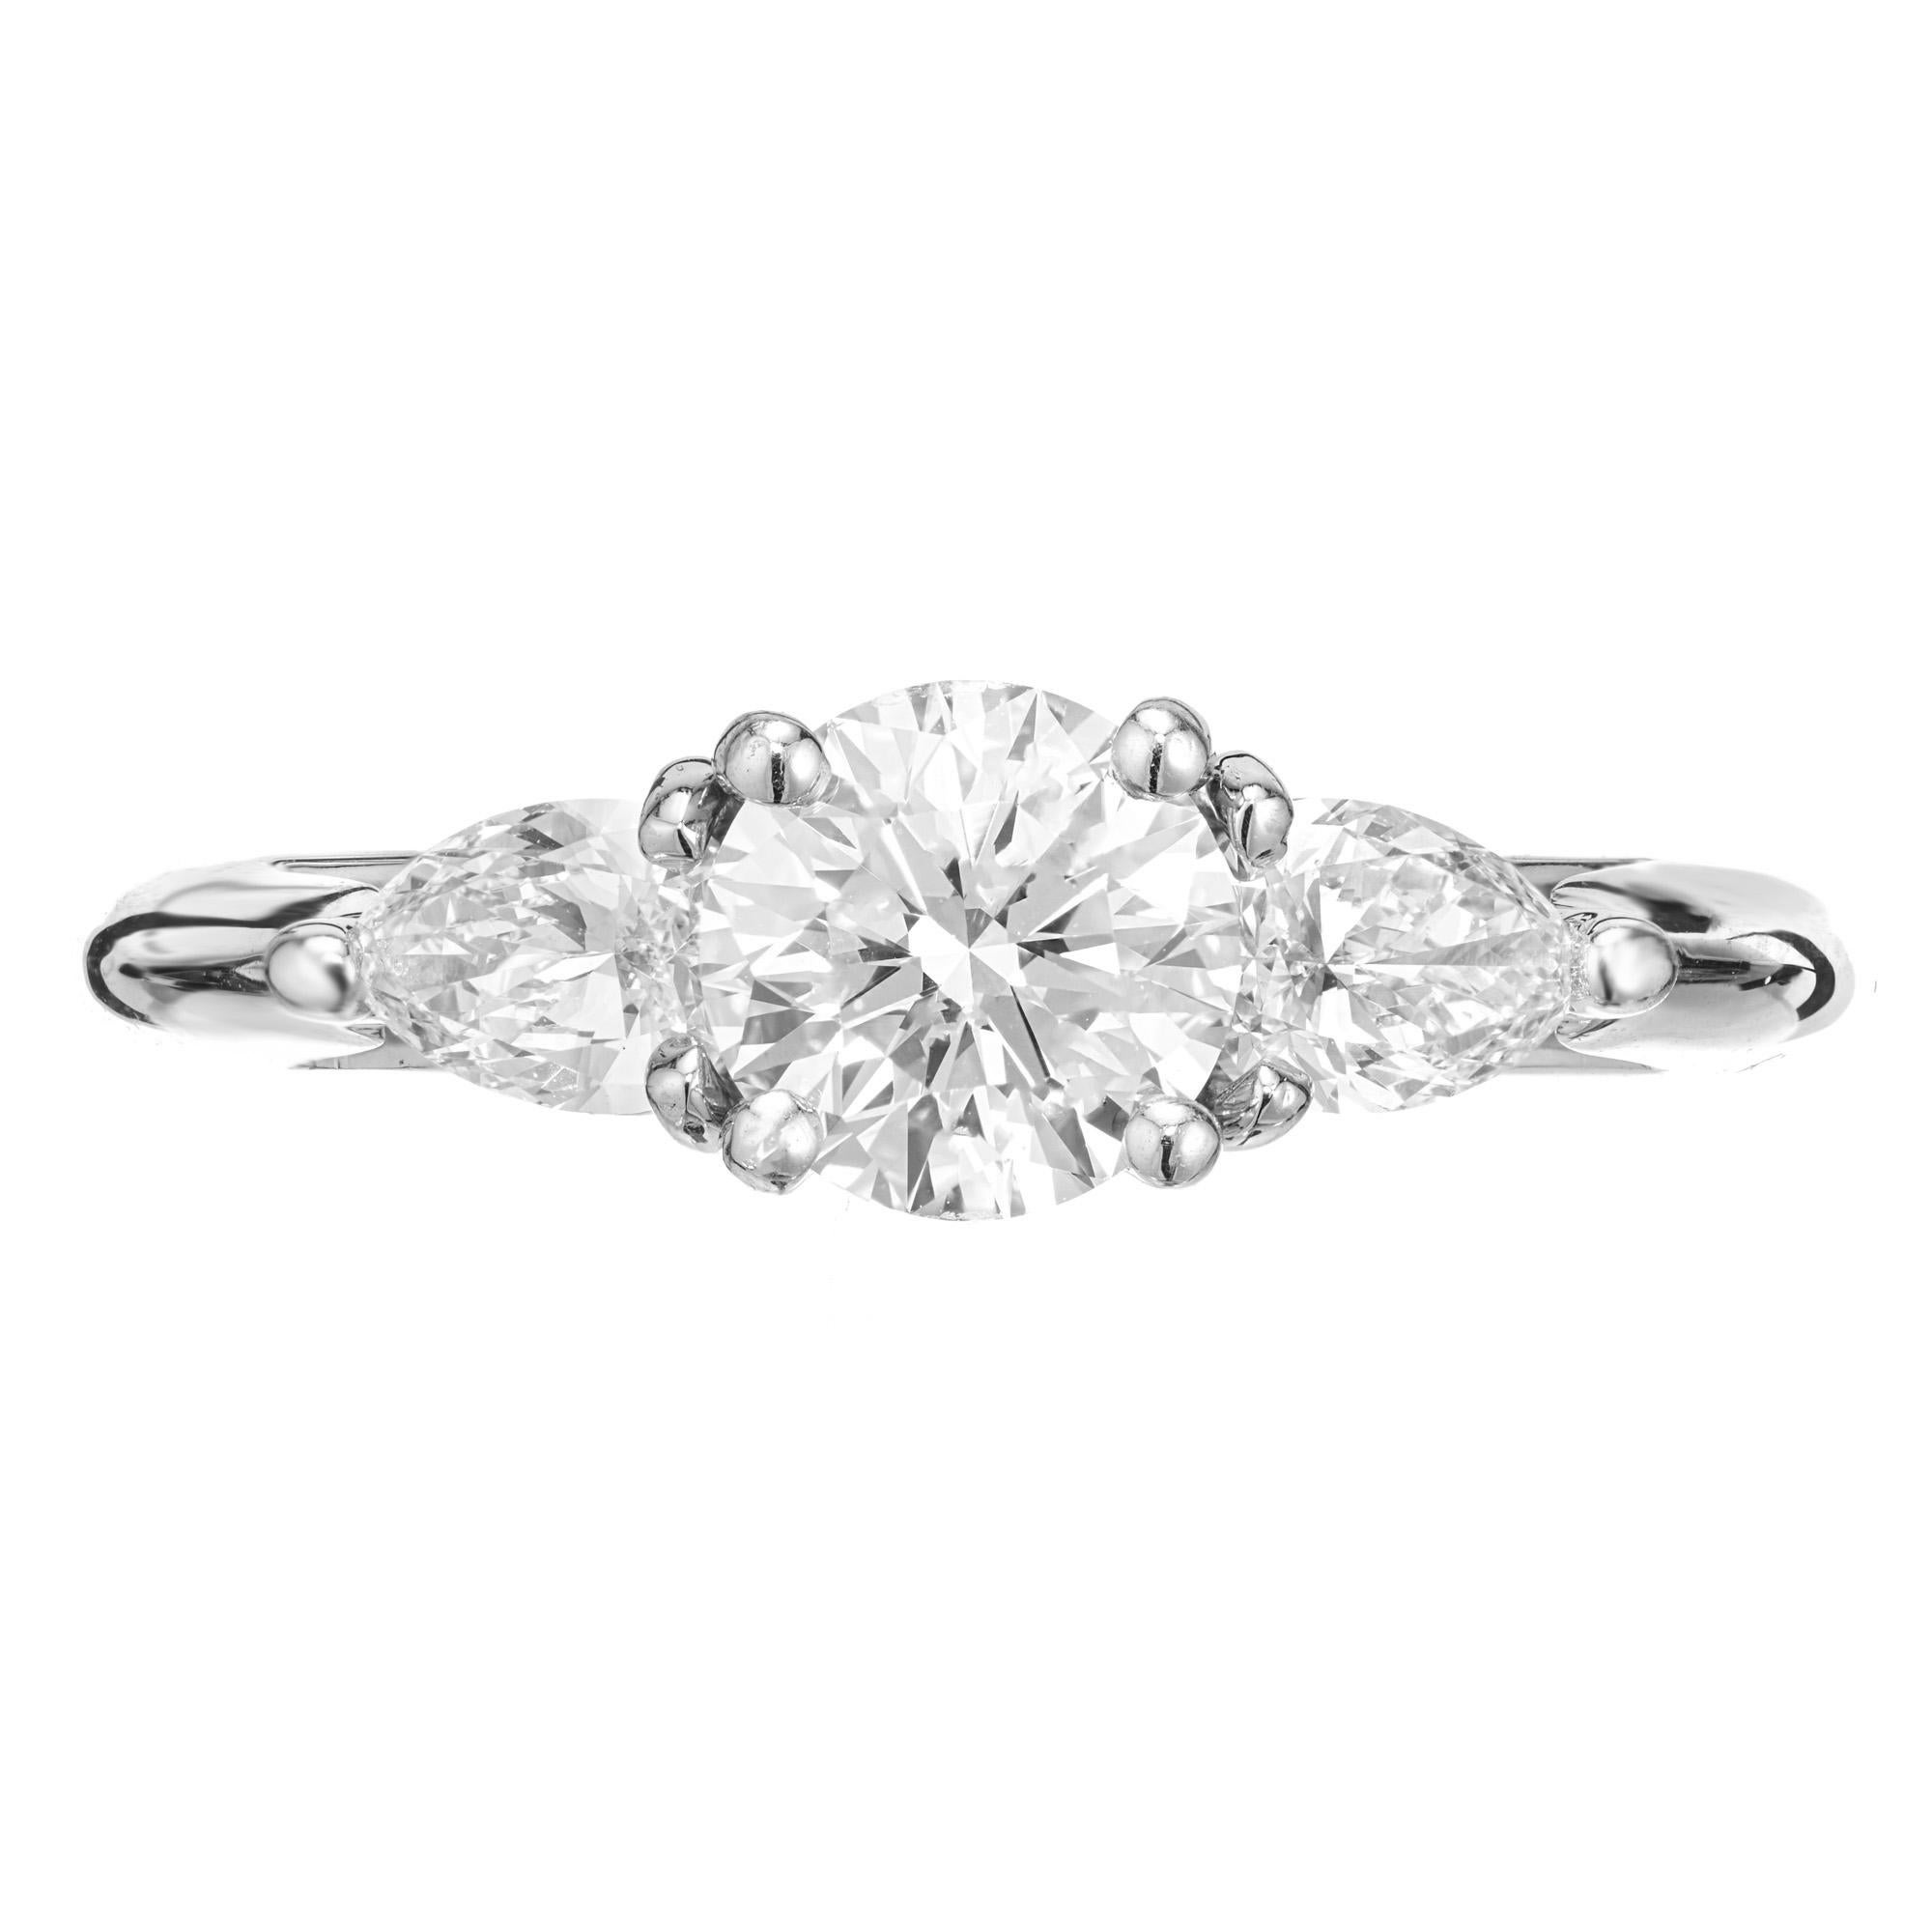 Diamond engagement ring. GIA certified round Ideal cut center diamond with great brilliance in a platinum three-stone setting with 2 pear shaped side diamonds, in a custom made setting designed and crafted in the Peter Suchy Workshop.

1 round